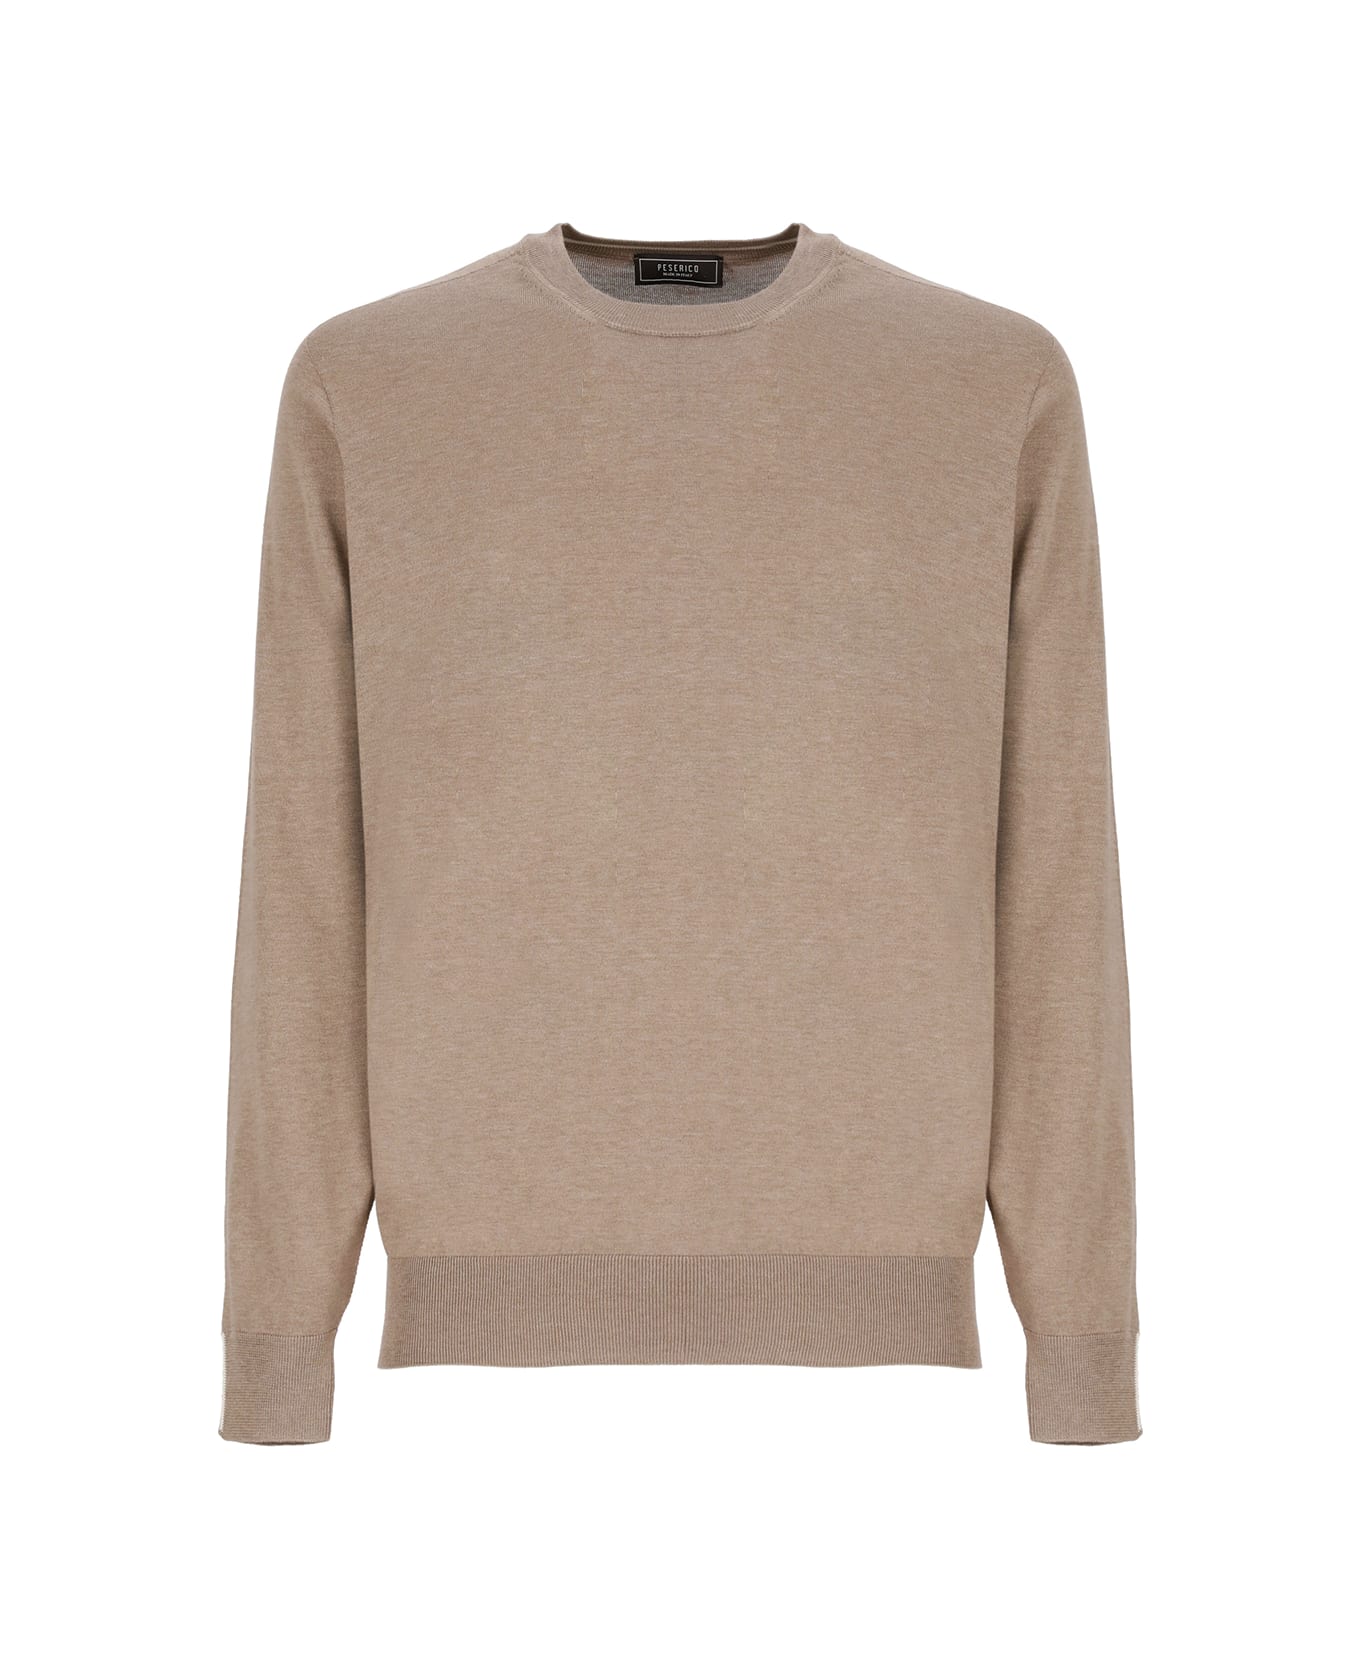 Peserico Silk And Cotton Sweater - Beige